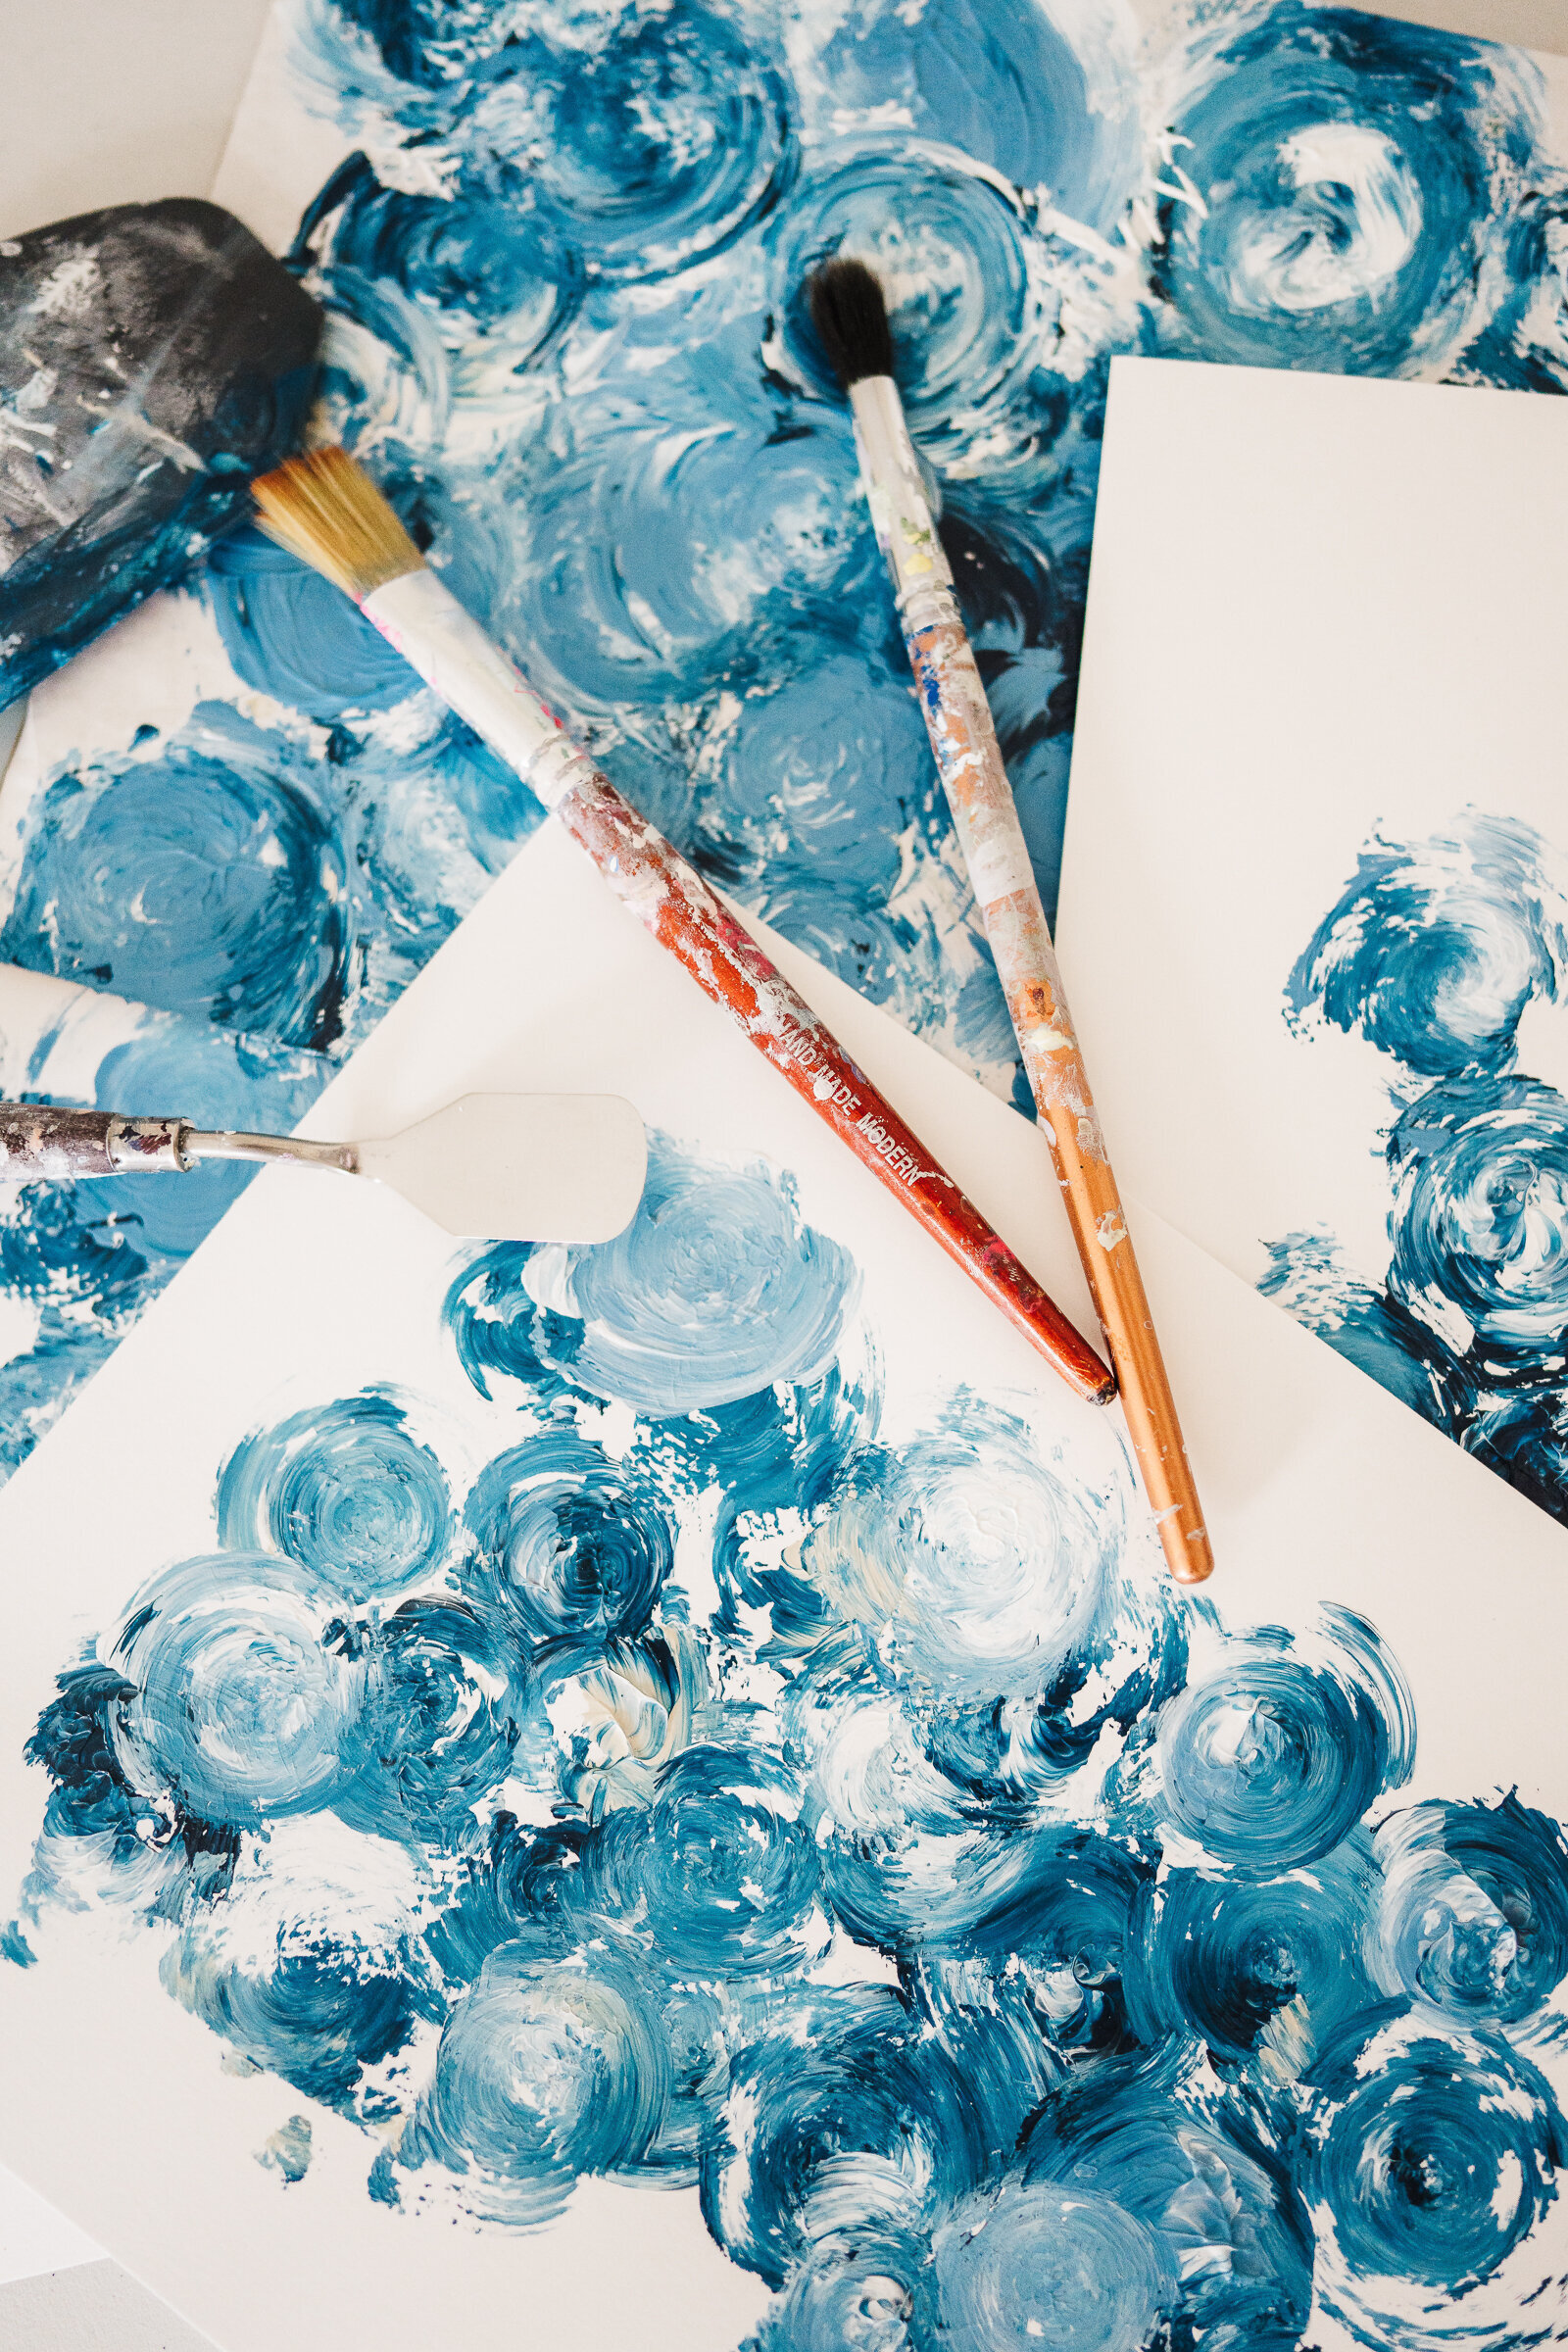 paintbrushes lie on top of white and blue painted paper